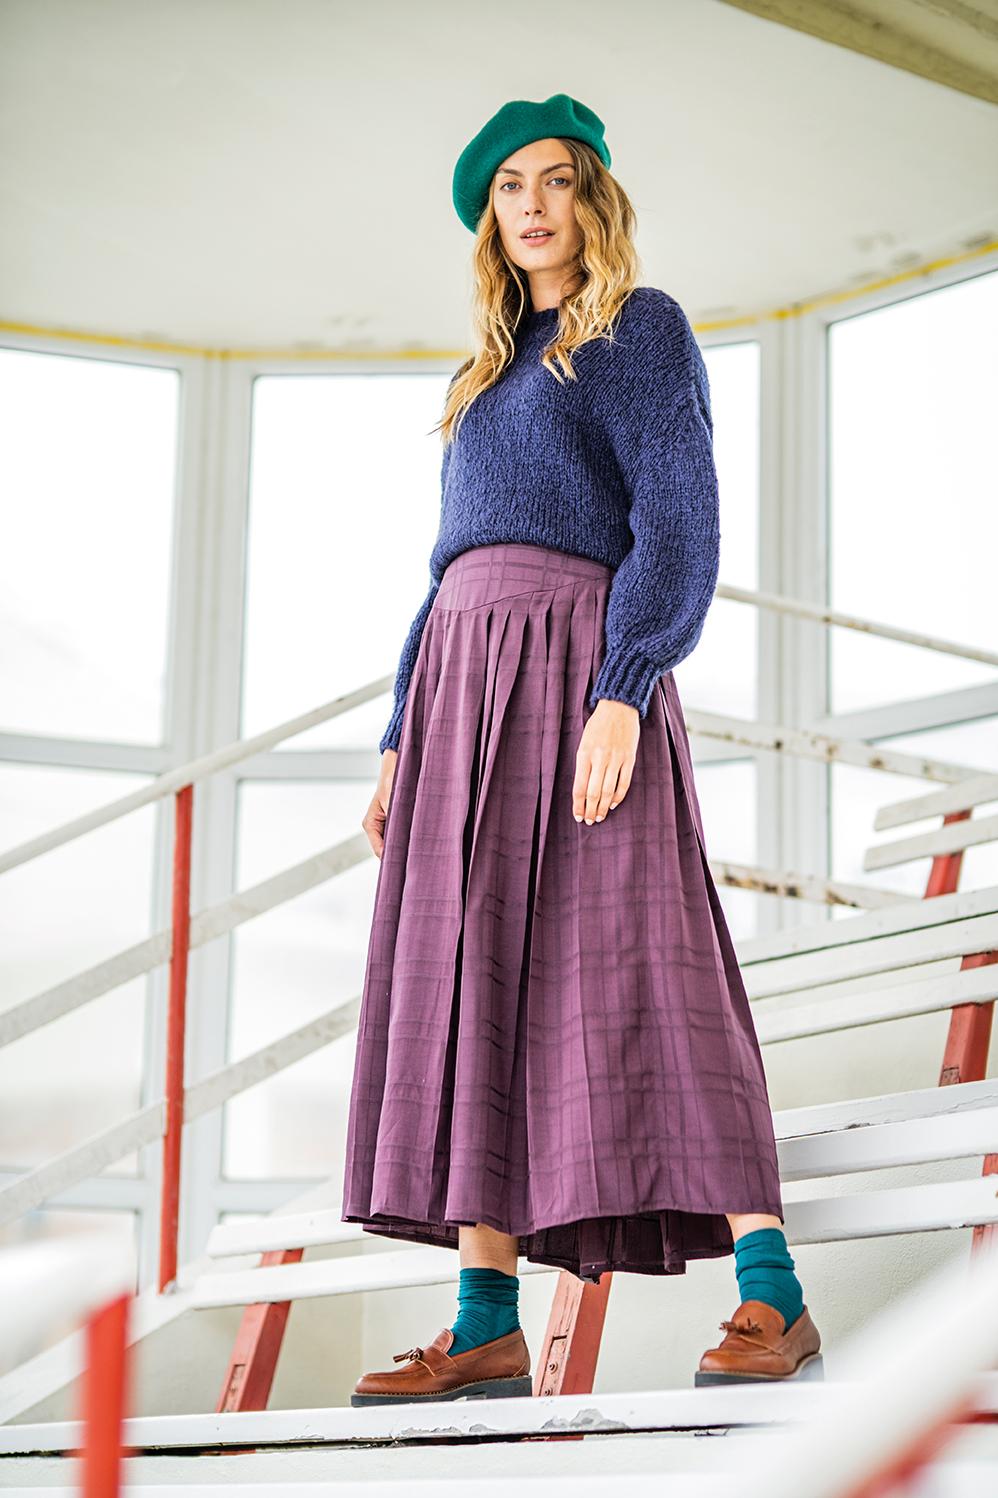 Woman wearing the Amira Skirt sewing pattern from Fibre Mood on The Fold Line. A skirt pattern made in polyester, polyamide or poplin fabrics, featuring pleats, fitted yoke, midi-length and side zip closing.